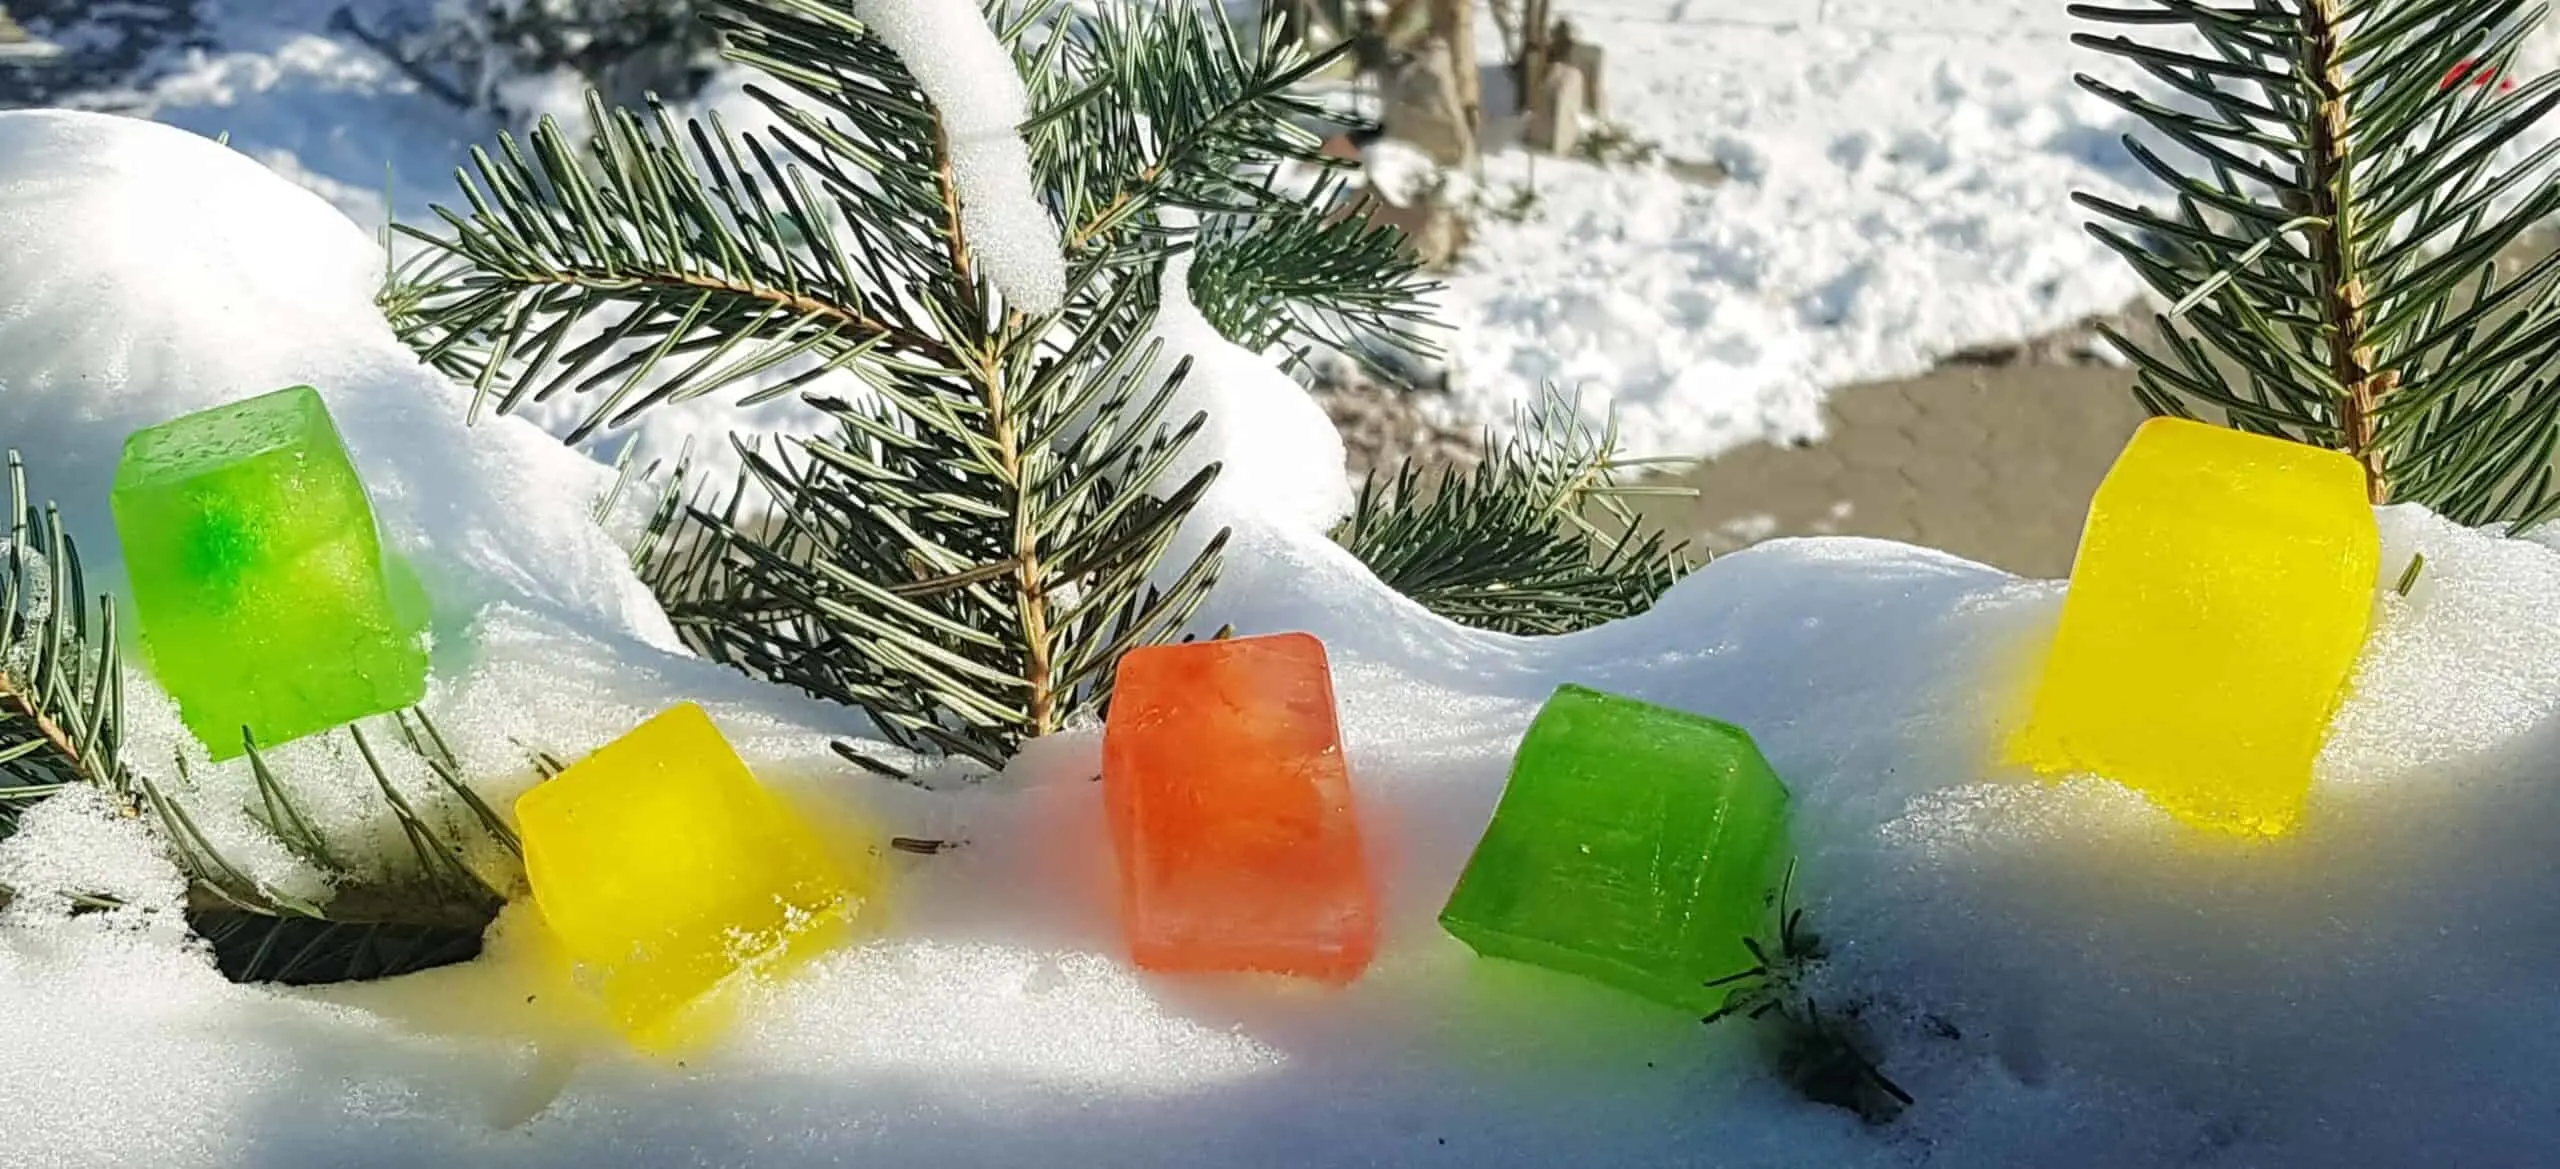 winter scavengerhunt ideas with colored ice cubes